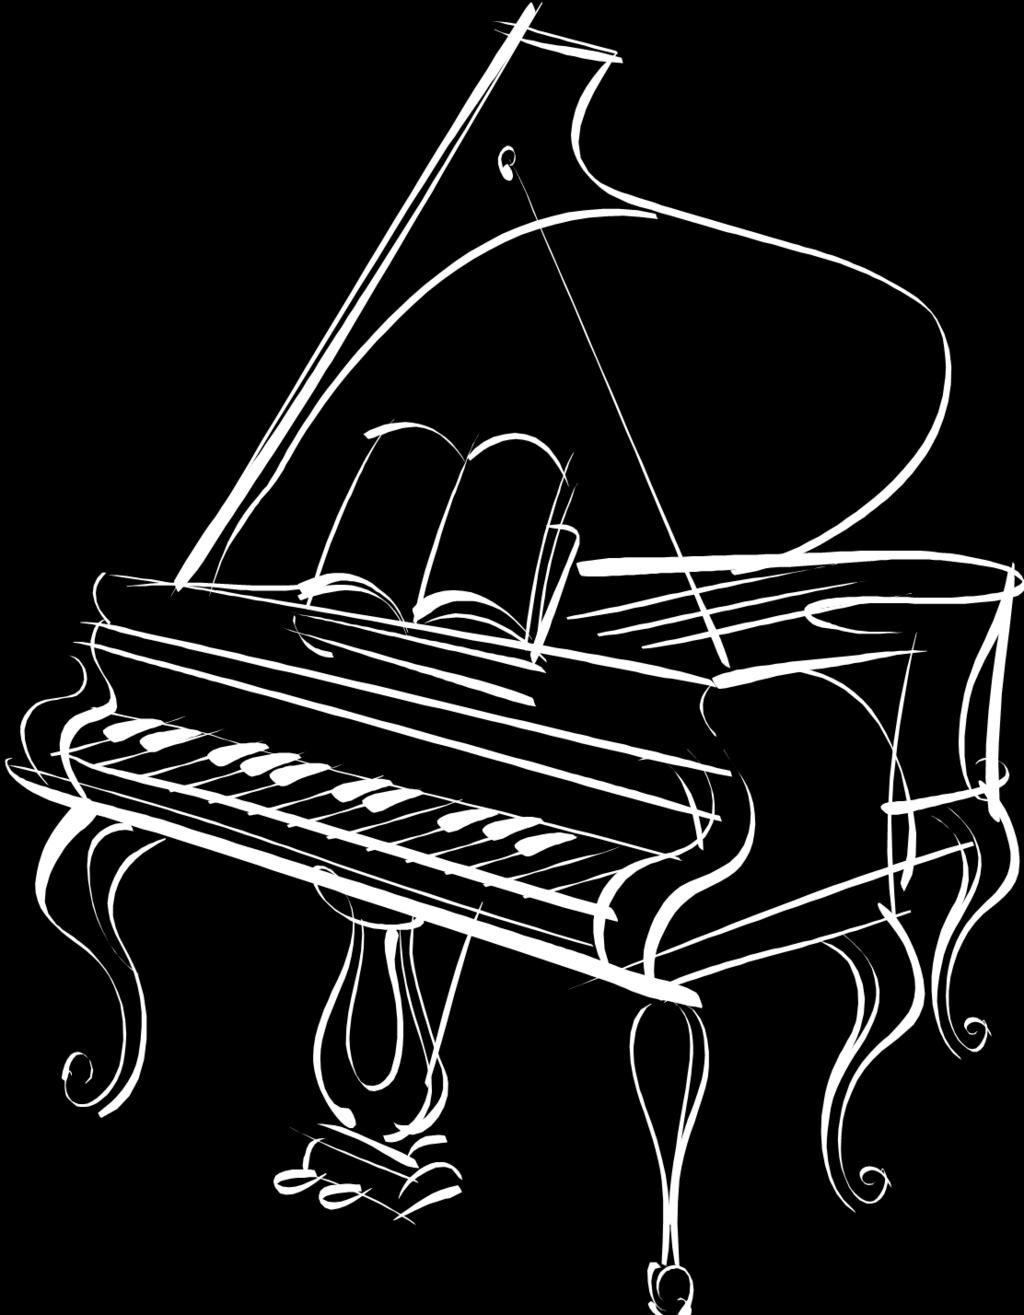 The Louisiana Musician THE OFFICIAL PUBLICATION OF L.M.E.A. PAT DEAVILLE, Editor P.O. BOX 6294 LAKE CHARLES, LOUISIANA 70606 STANDARD U.S. POSTAGE PAID PERMIT # 51 70601 Schedule of Events National Piano Competition, Op.